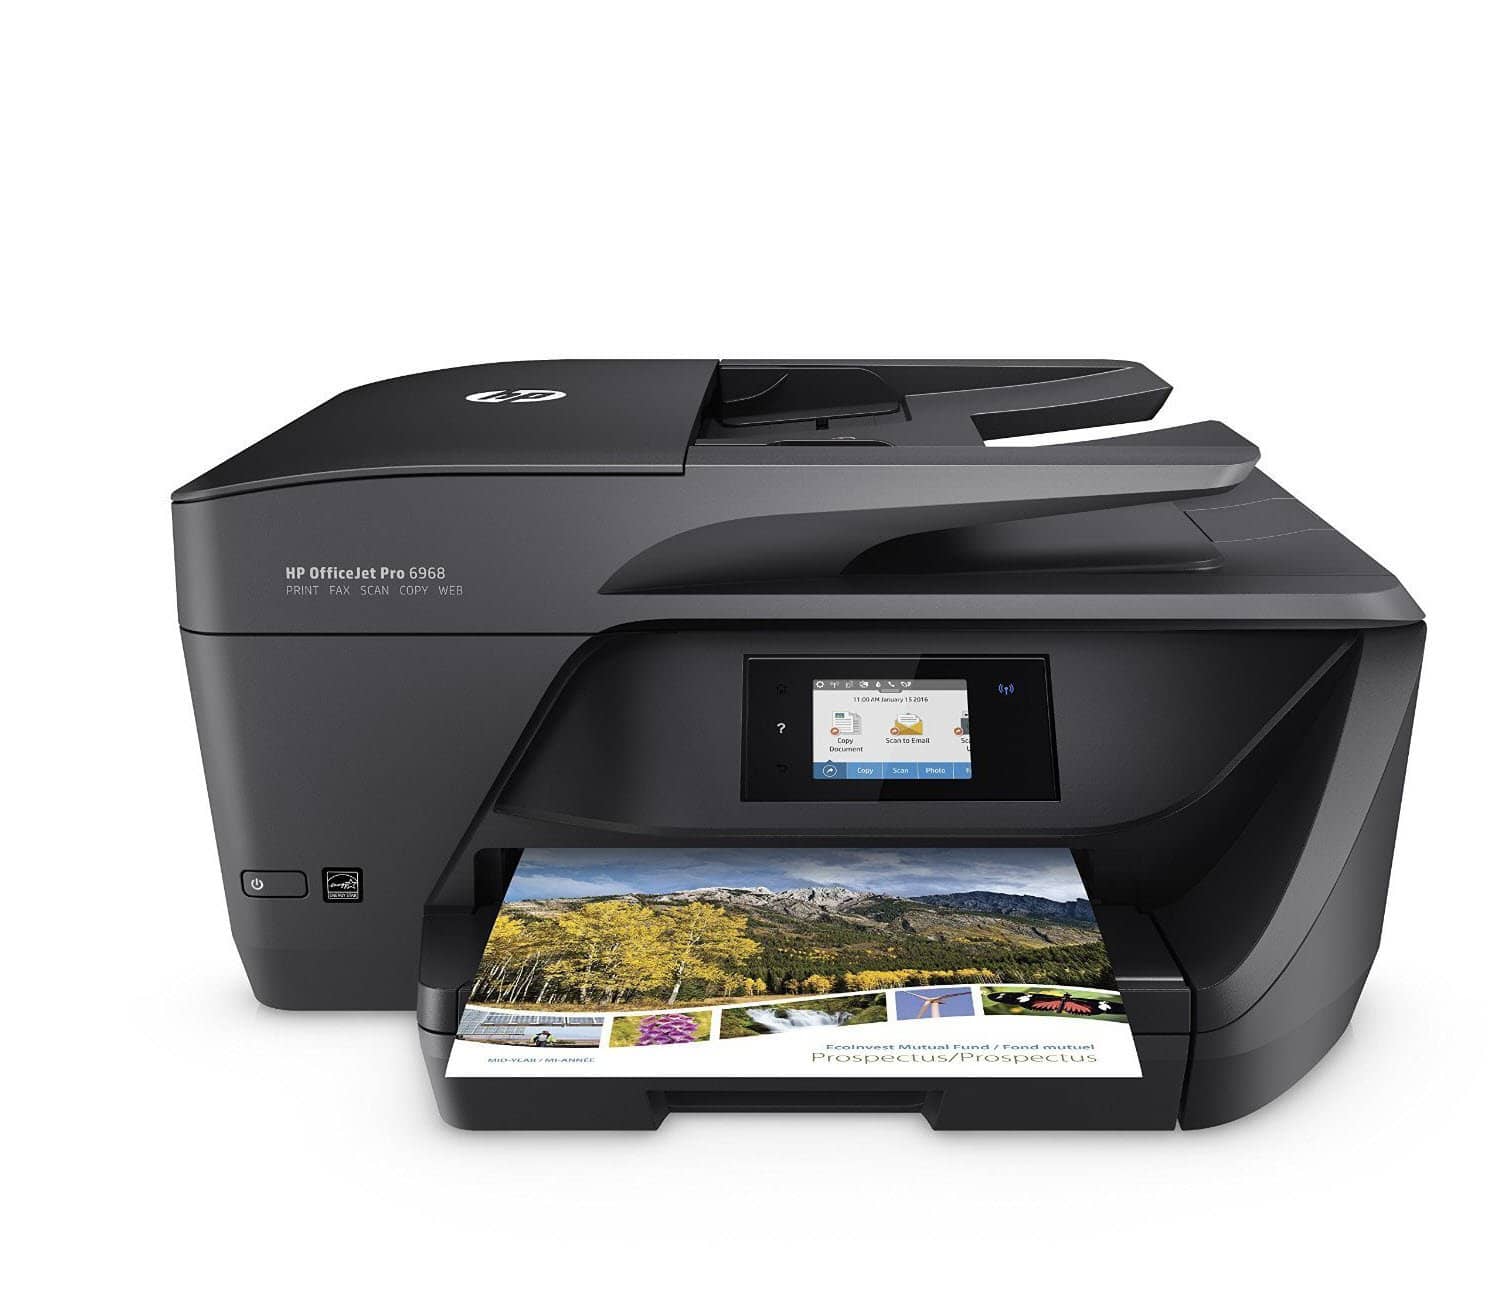 HP OfficeJet Pro 6968 Wireless All-in-One Photo Printer with Instant Ink Bundle